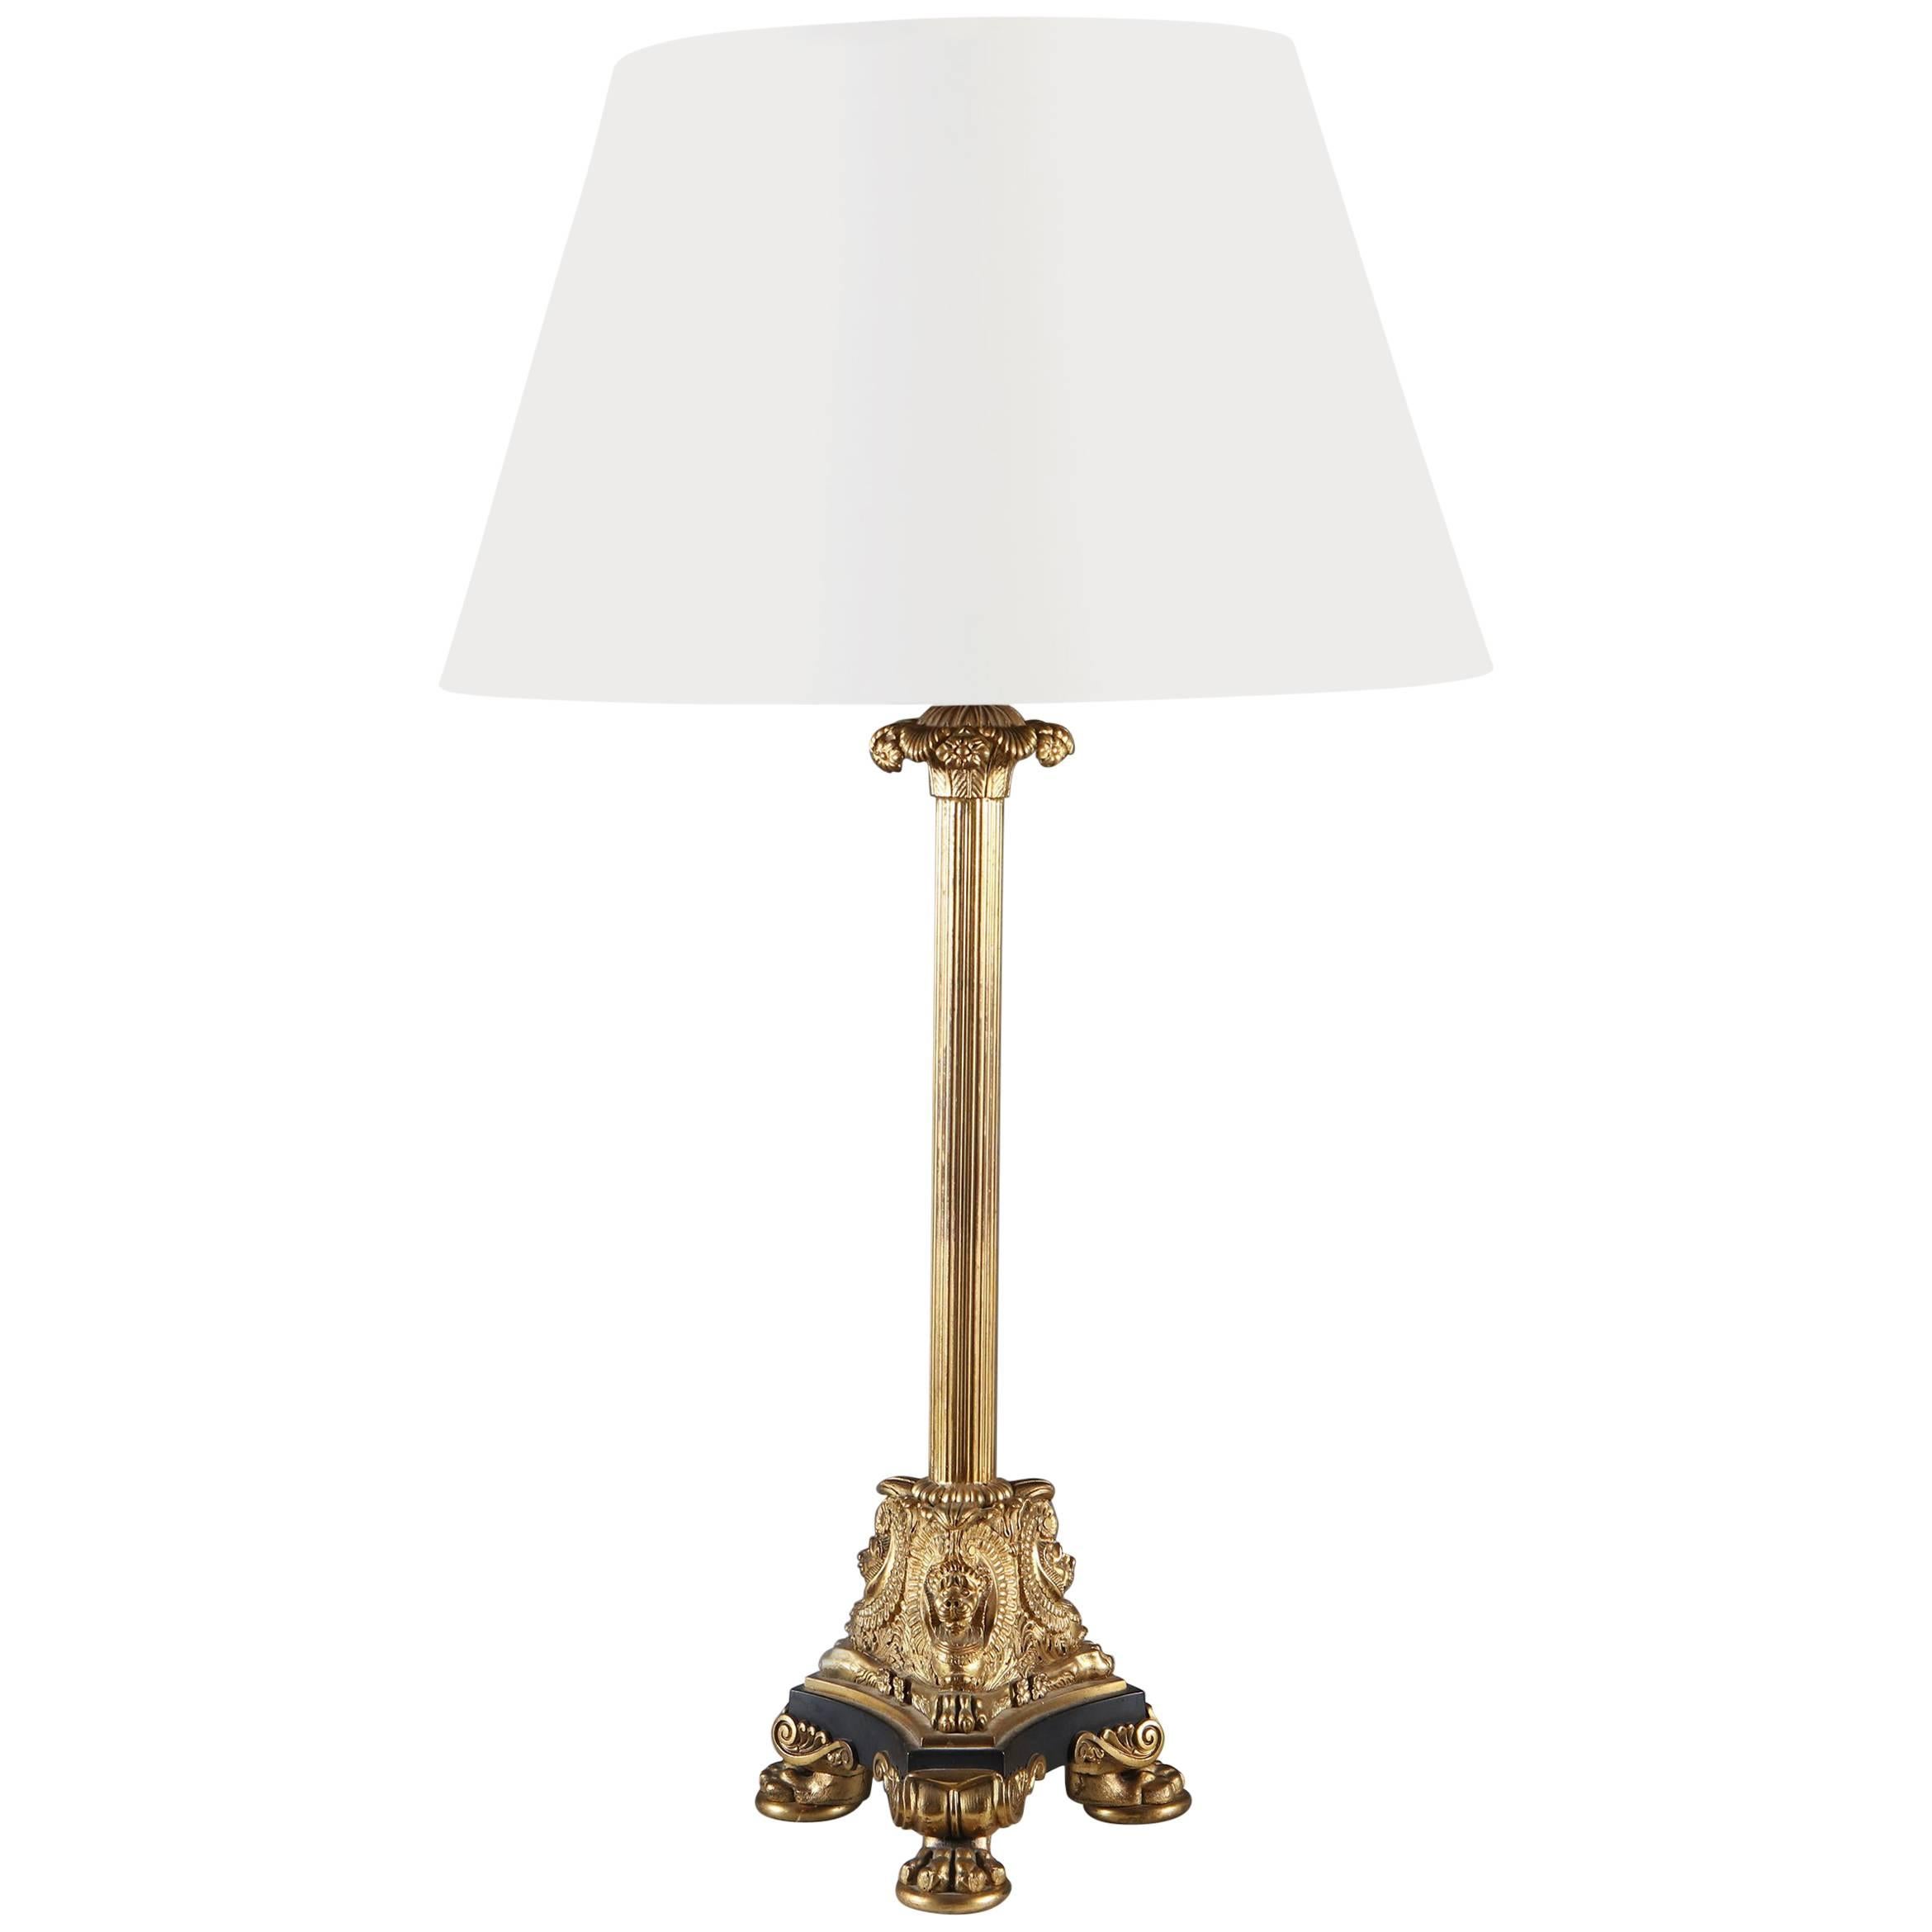 A Late 19th Century English Brass Column Lamp with Tripod Base For Sale